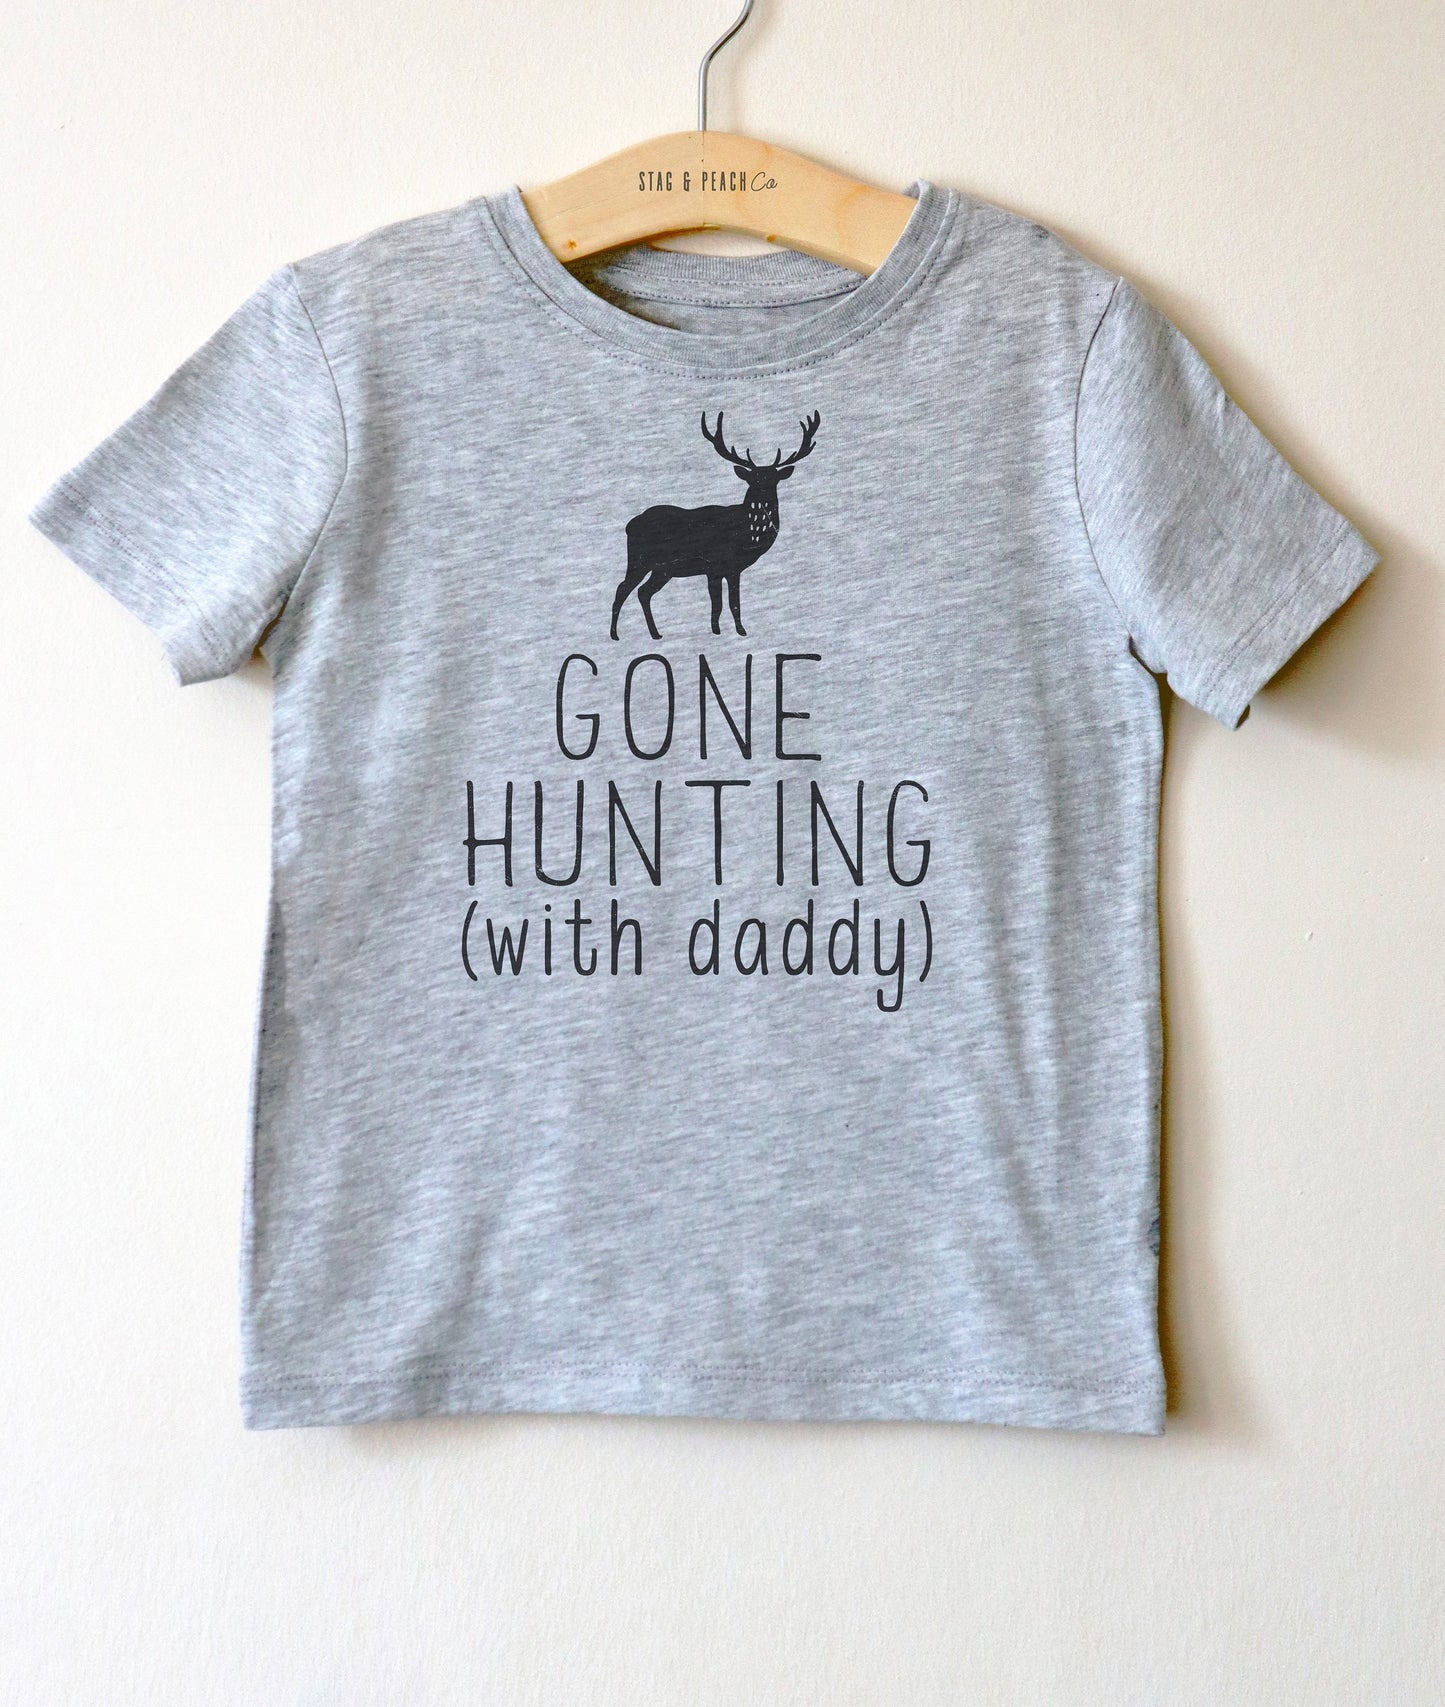 Gone Hunting With Daddy Kids Shirt-Hunting Gifts, Deer Print Shirt, Deer Hunting Shirt, Hunting Kids Clothes, Hunting Toddler Gift, Deer Tee